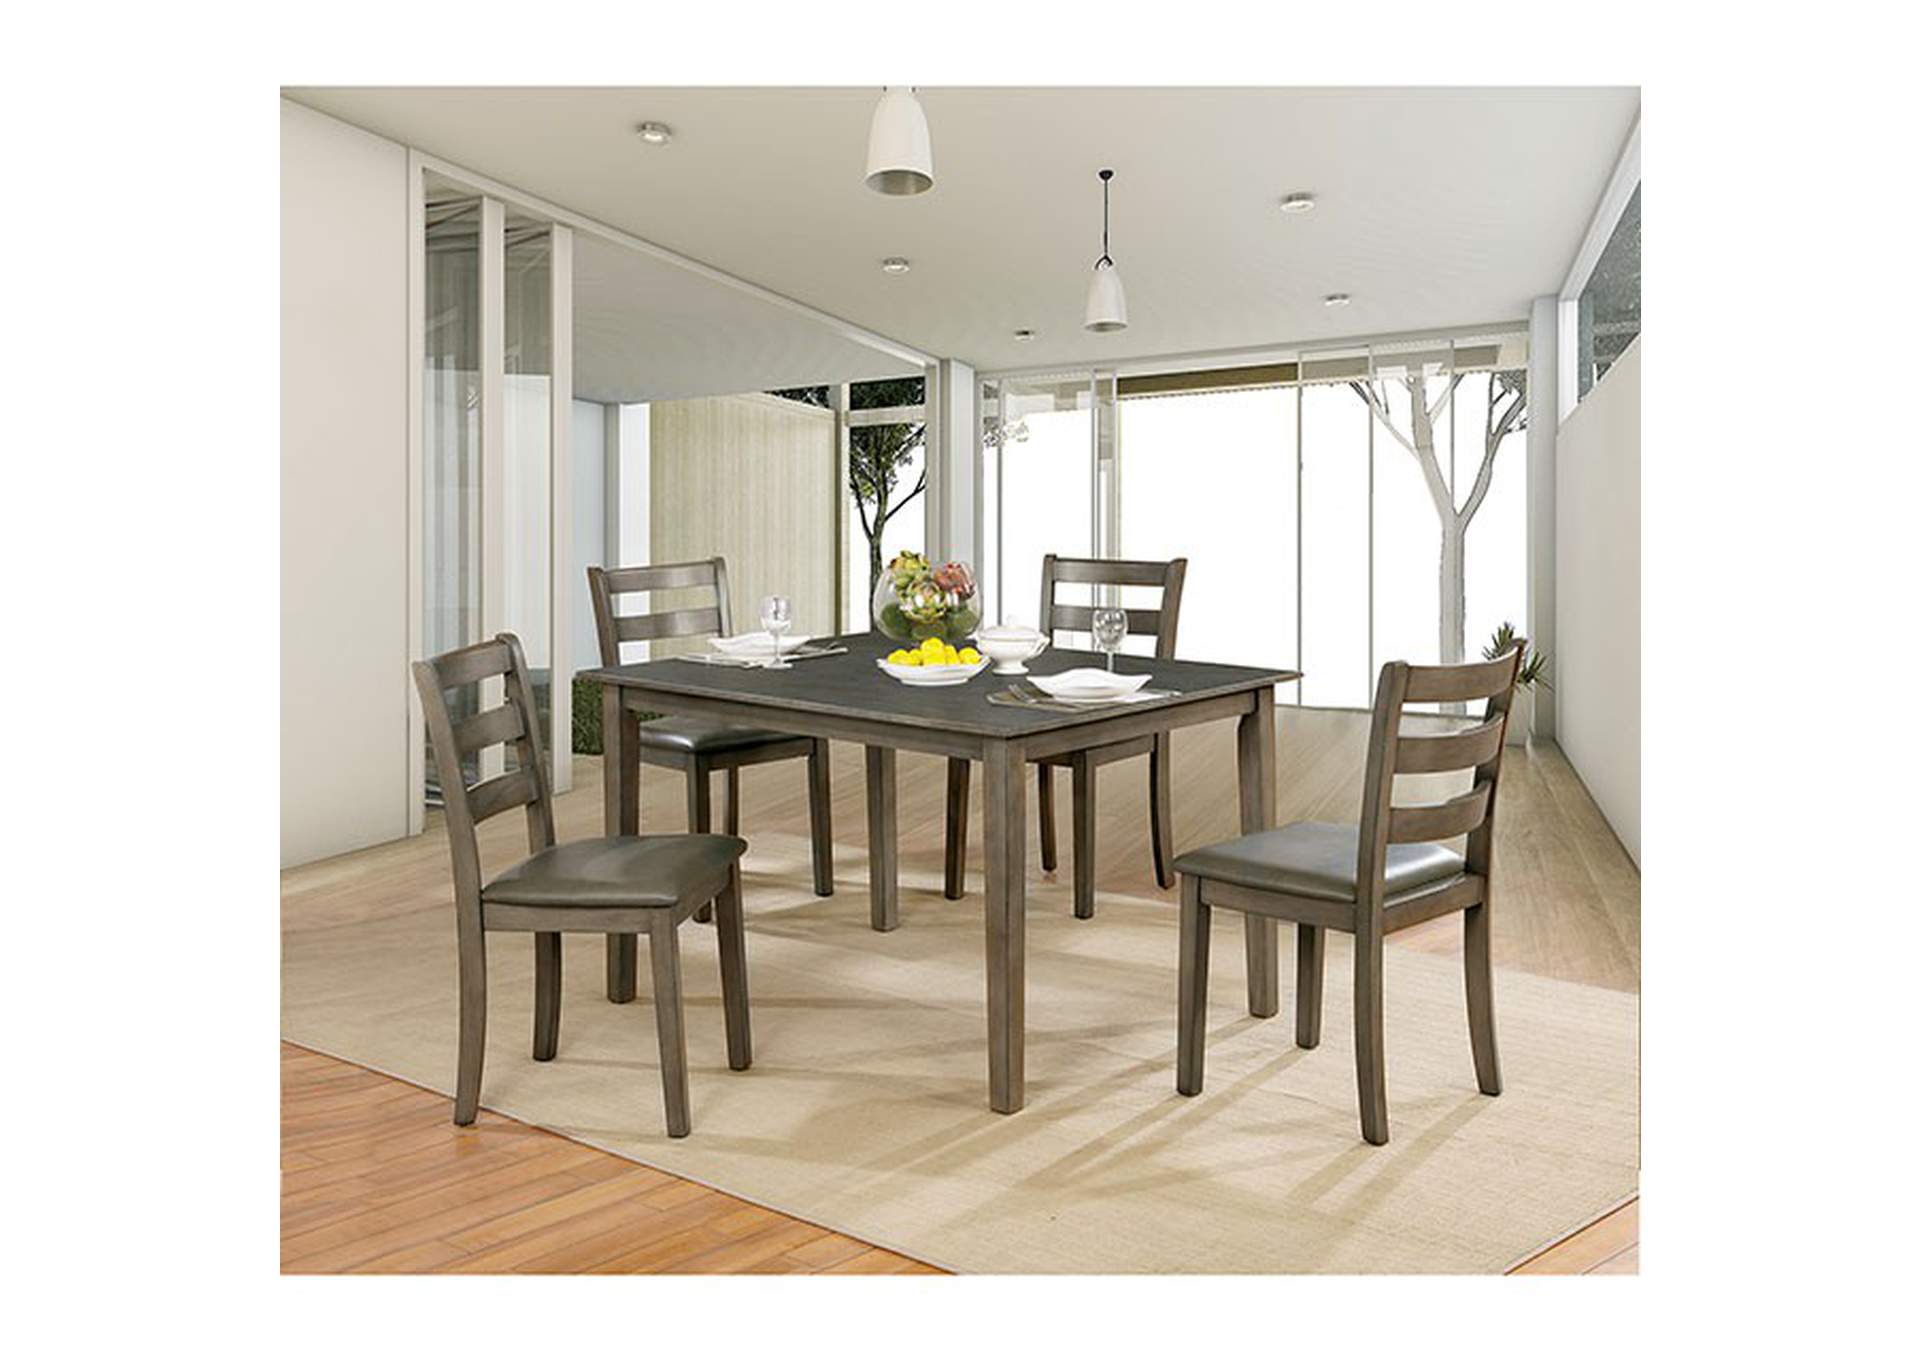 Marcelle Dining Table,Furniture of America